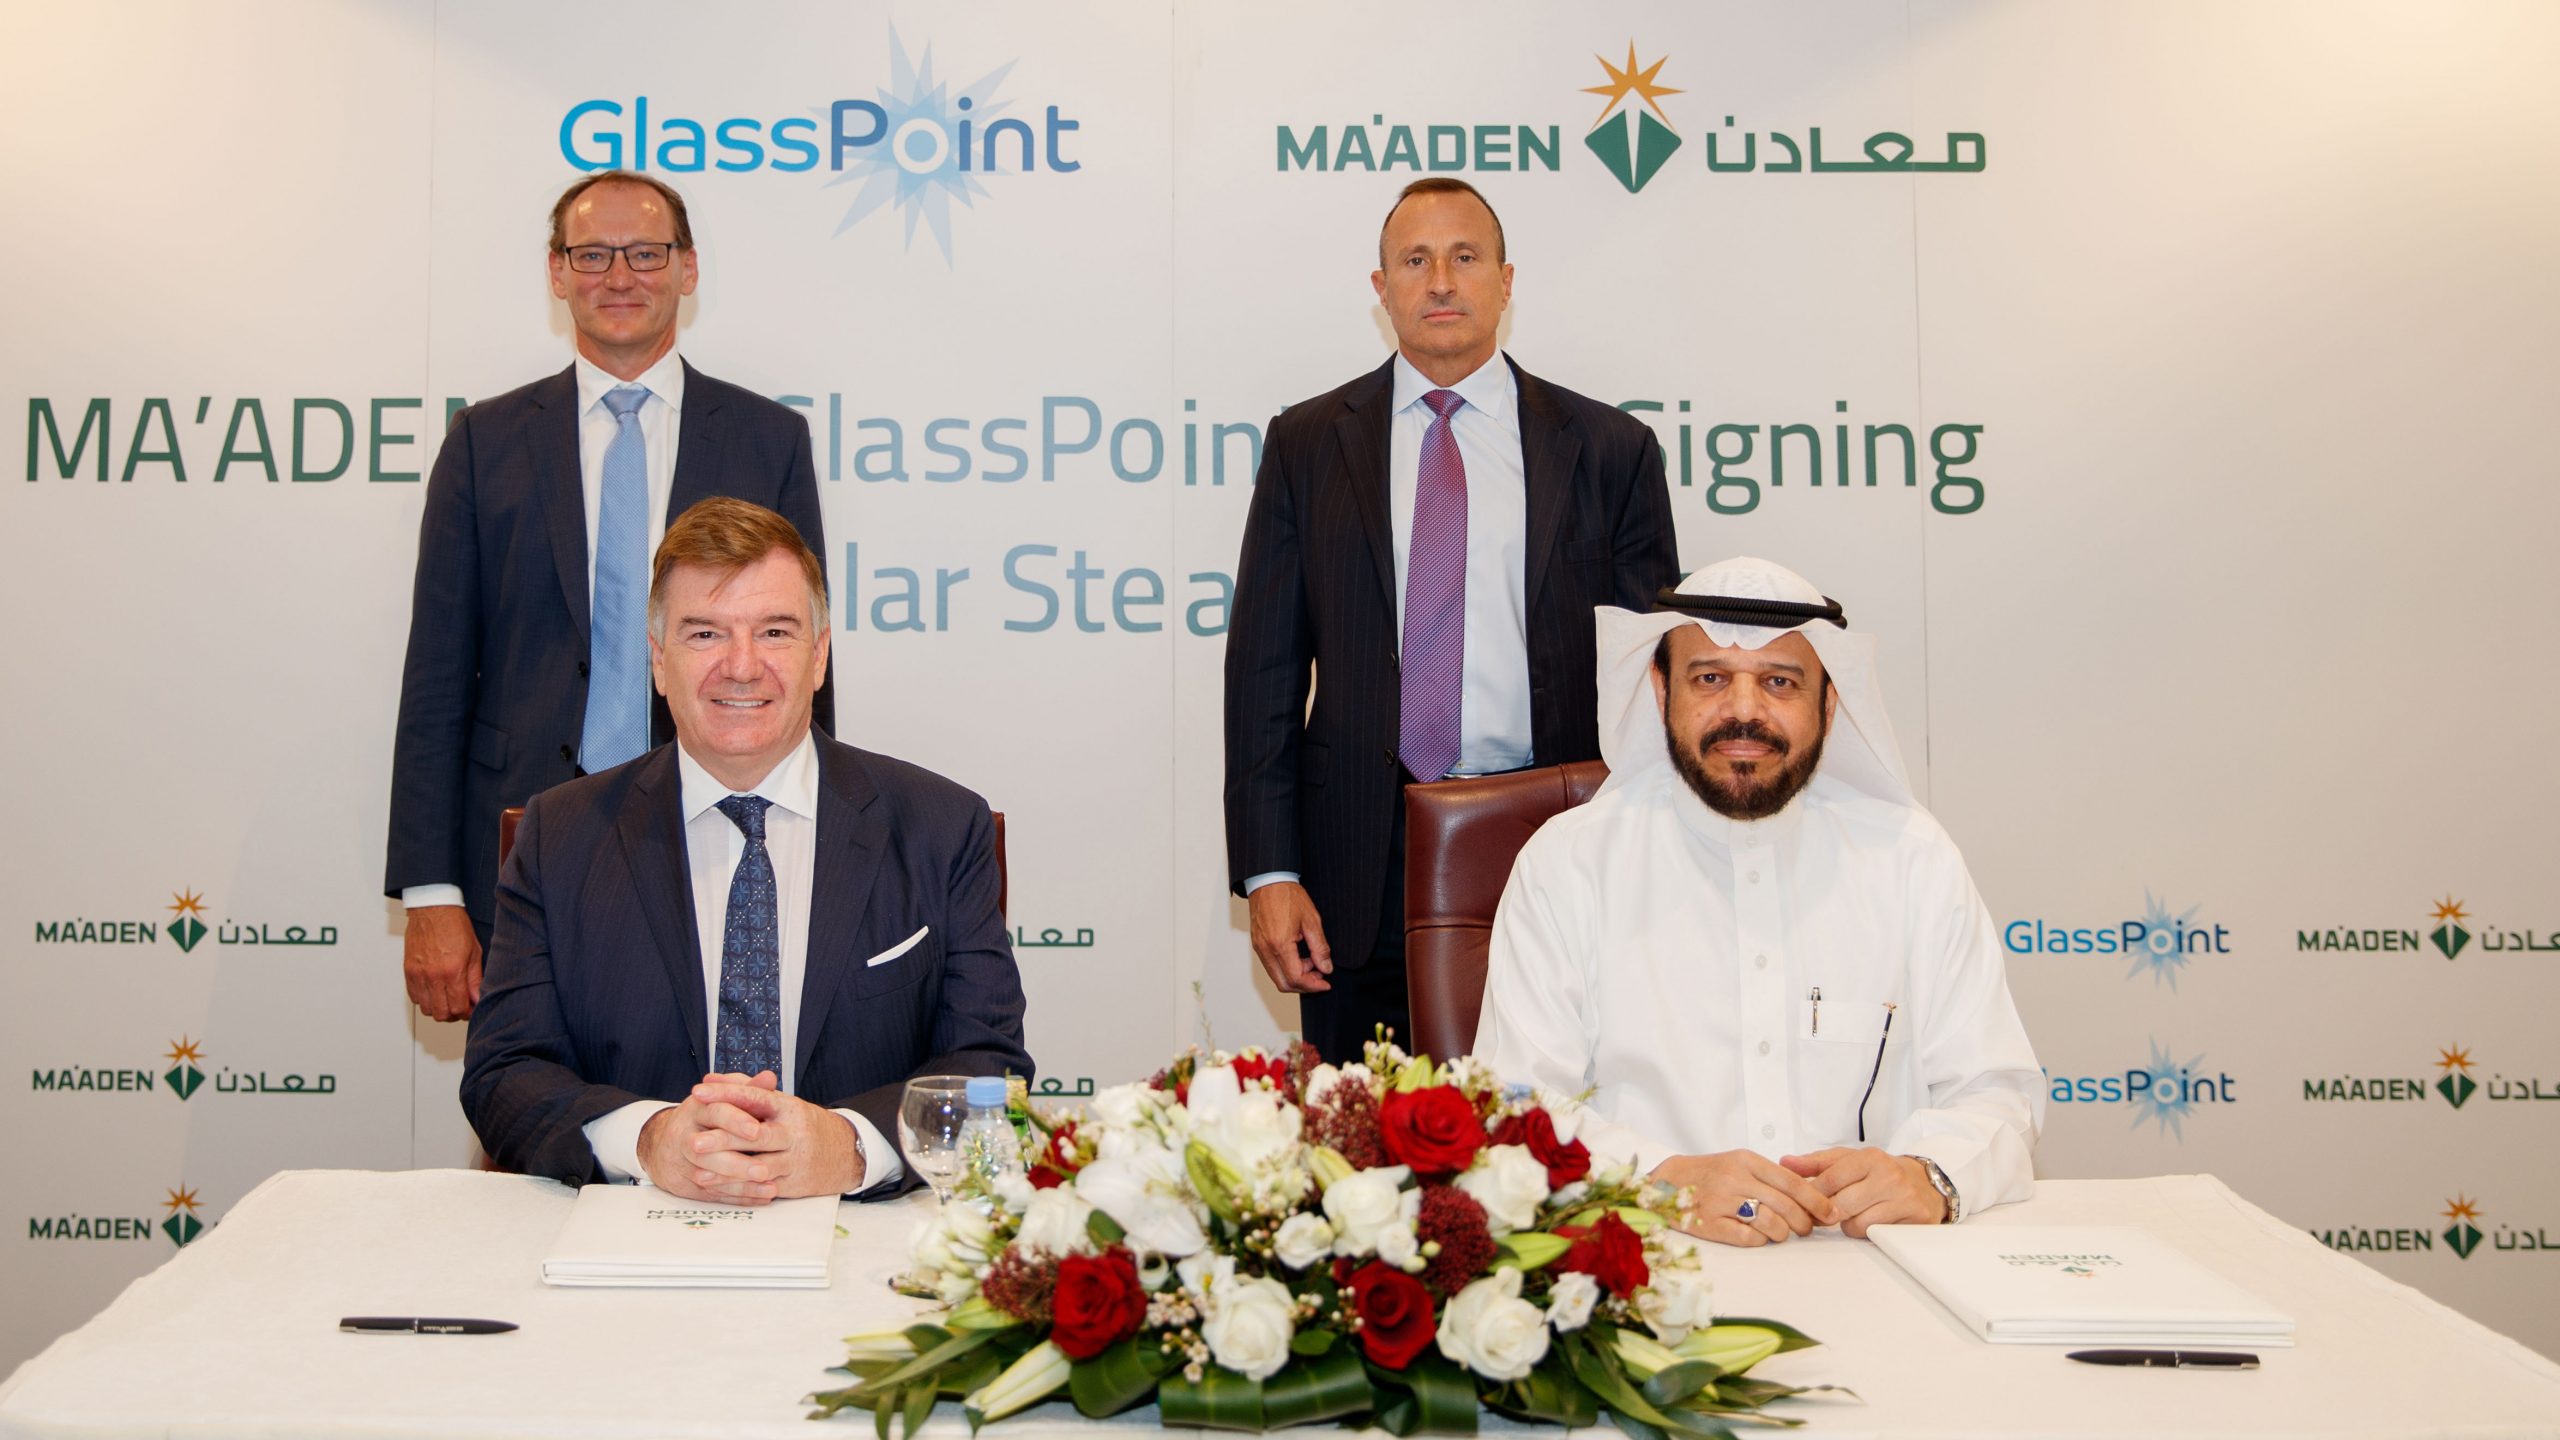 Saudi Arabia’s leading mining company signs an MOU to facilitate the study to develop the first solar steam project in the kingdom to decarbonize MA’ADEN’s alumina refinery